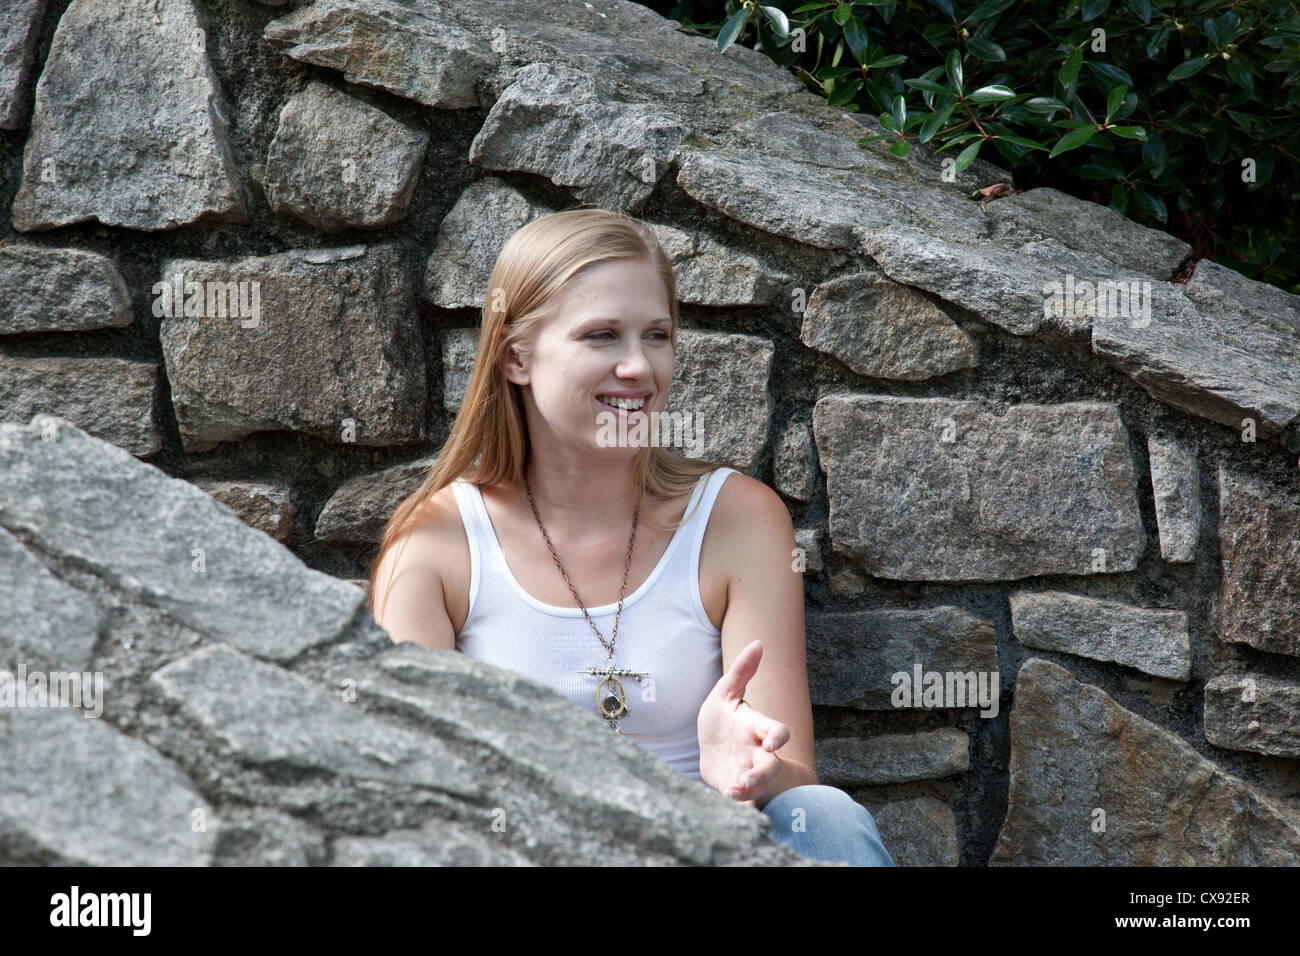 Pretty blond woman sitting outside on stone steps and looking to the right with a happy smile Stock Photo